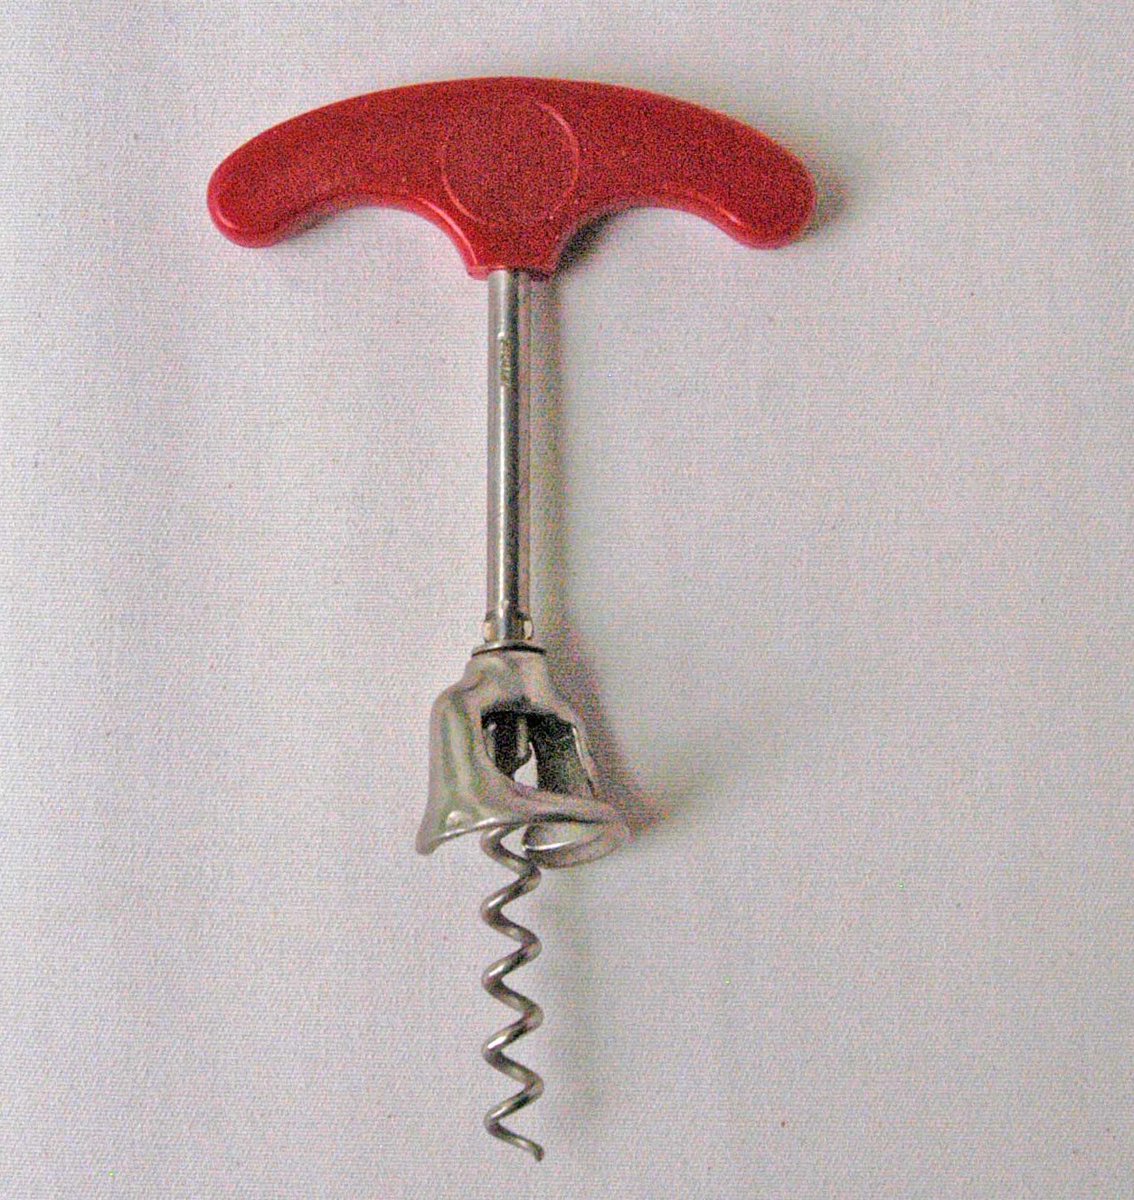 💙✴️💙ON SALE! Sale ends Tonight, May 4th!
Vintage RED Corkscrew ~ check out this beauty!
nutmegcottage.etsy.com/listing/148223… #wine #corkscrew #etsy #pottiteam #party #OnSale #buynow #gift #vintage